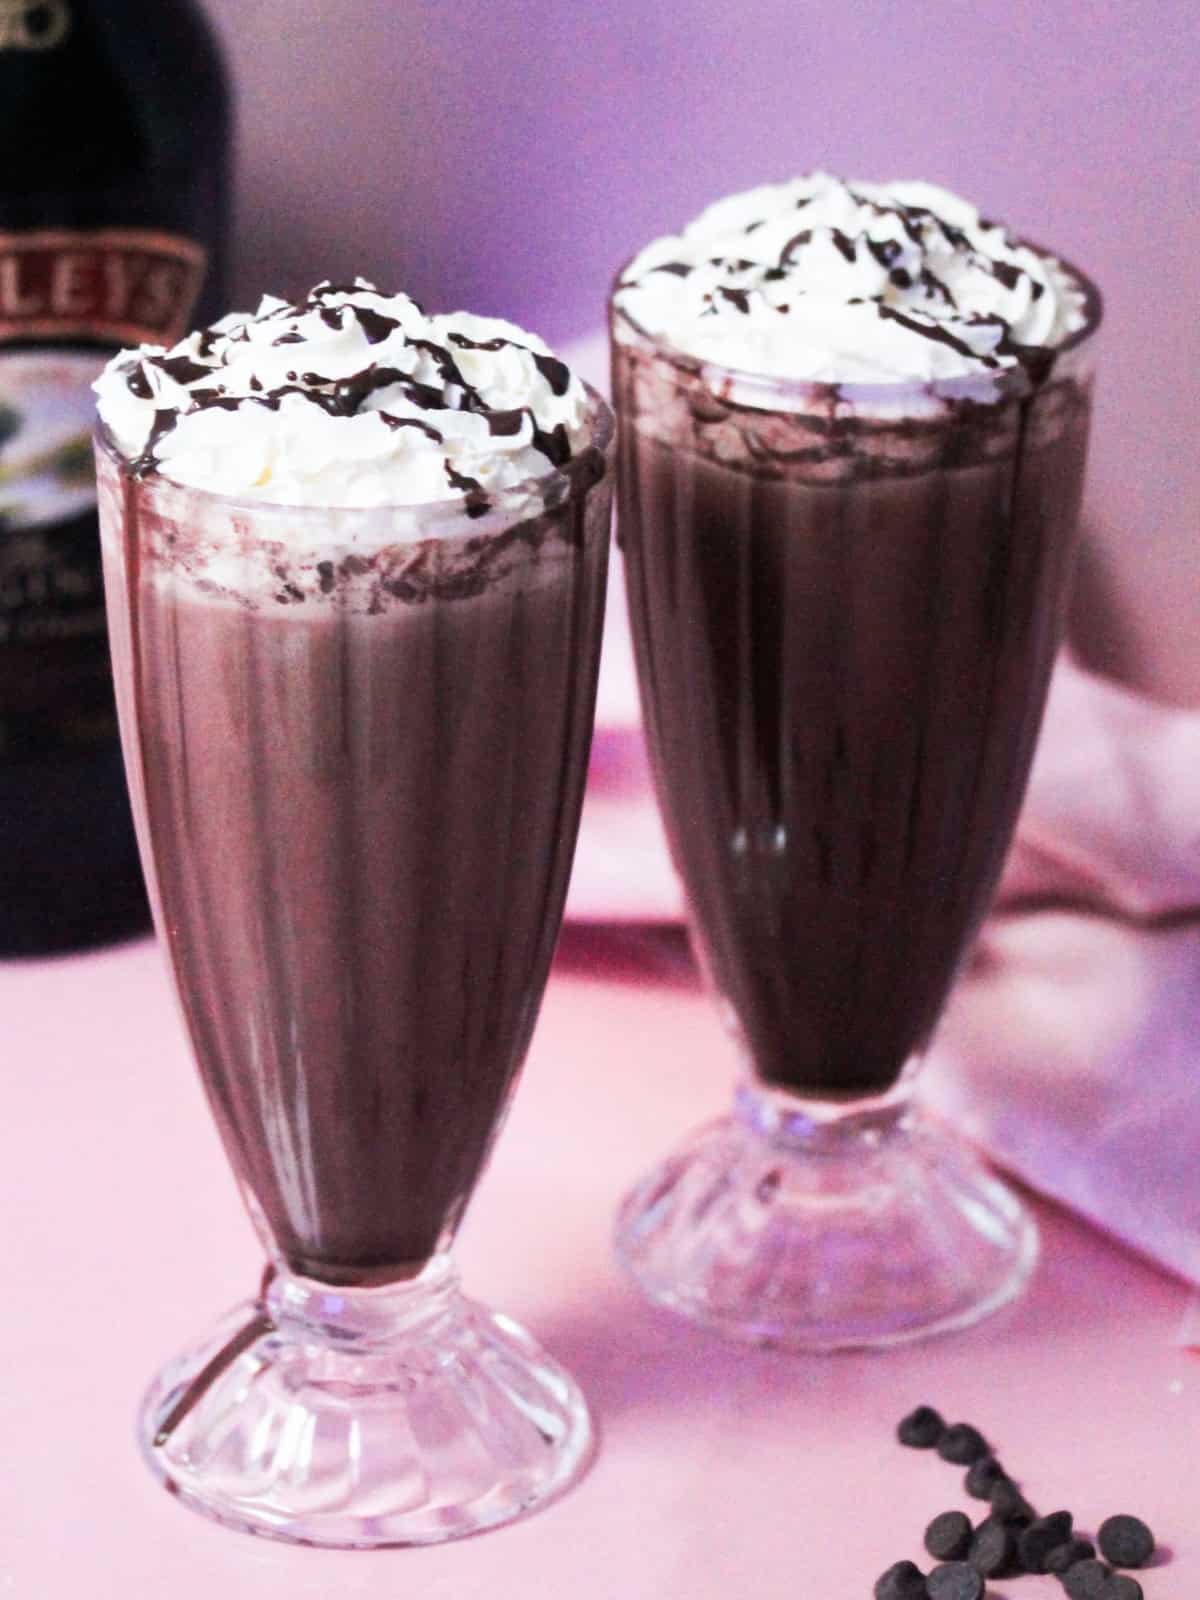 Baileys Hot Chocolate with chocolate syrup and whipped cream.